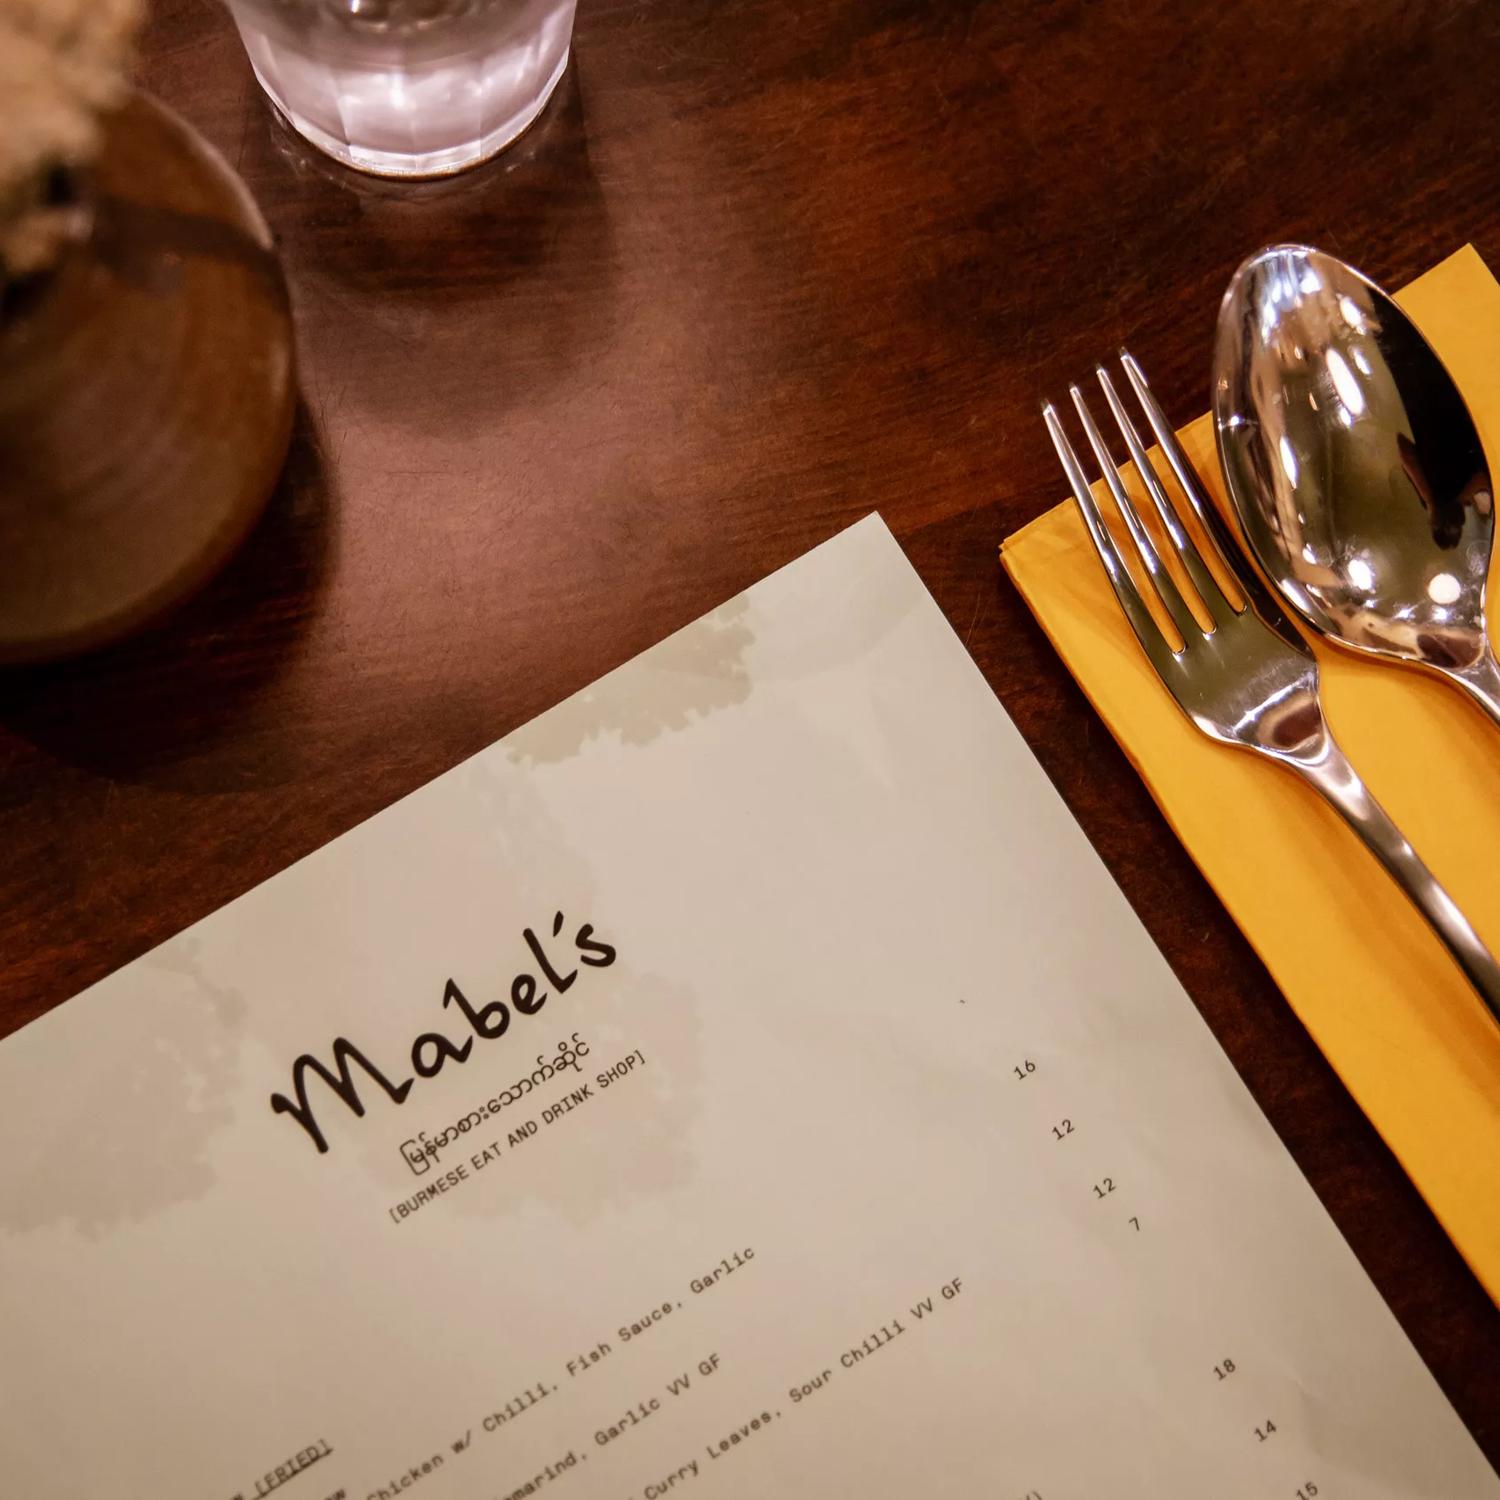 The menu at Mabel's, a Burmese Eat & Drink Shop in Wellington's city centre, placed on a wooden table with a brown flower vase, a water glass, and a yellow napkin with a fork and spoon. 